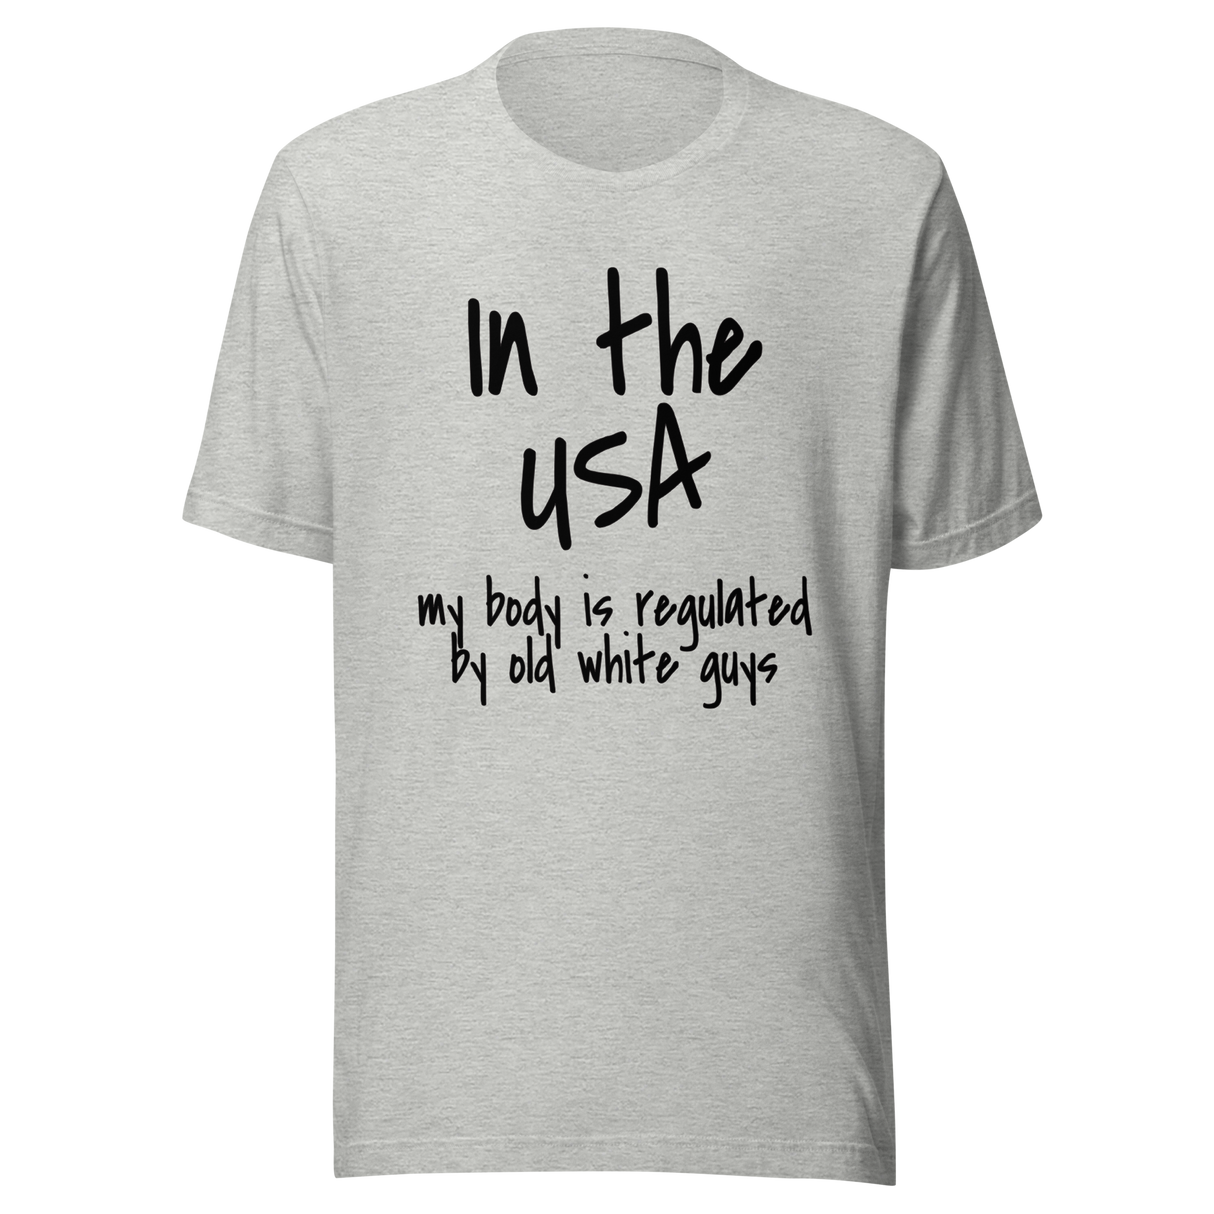 in-the-usa-its-normal-for-kids-to-be-killed-by-guns-while-at-school-usa-tee-normal-t-shirt-guns-tee-t-shirt-tee#color_athletic-heather